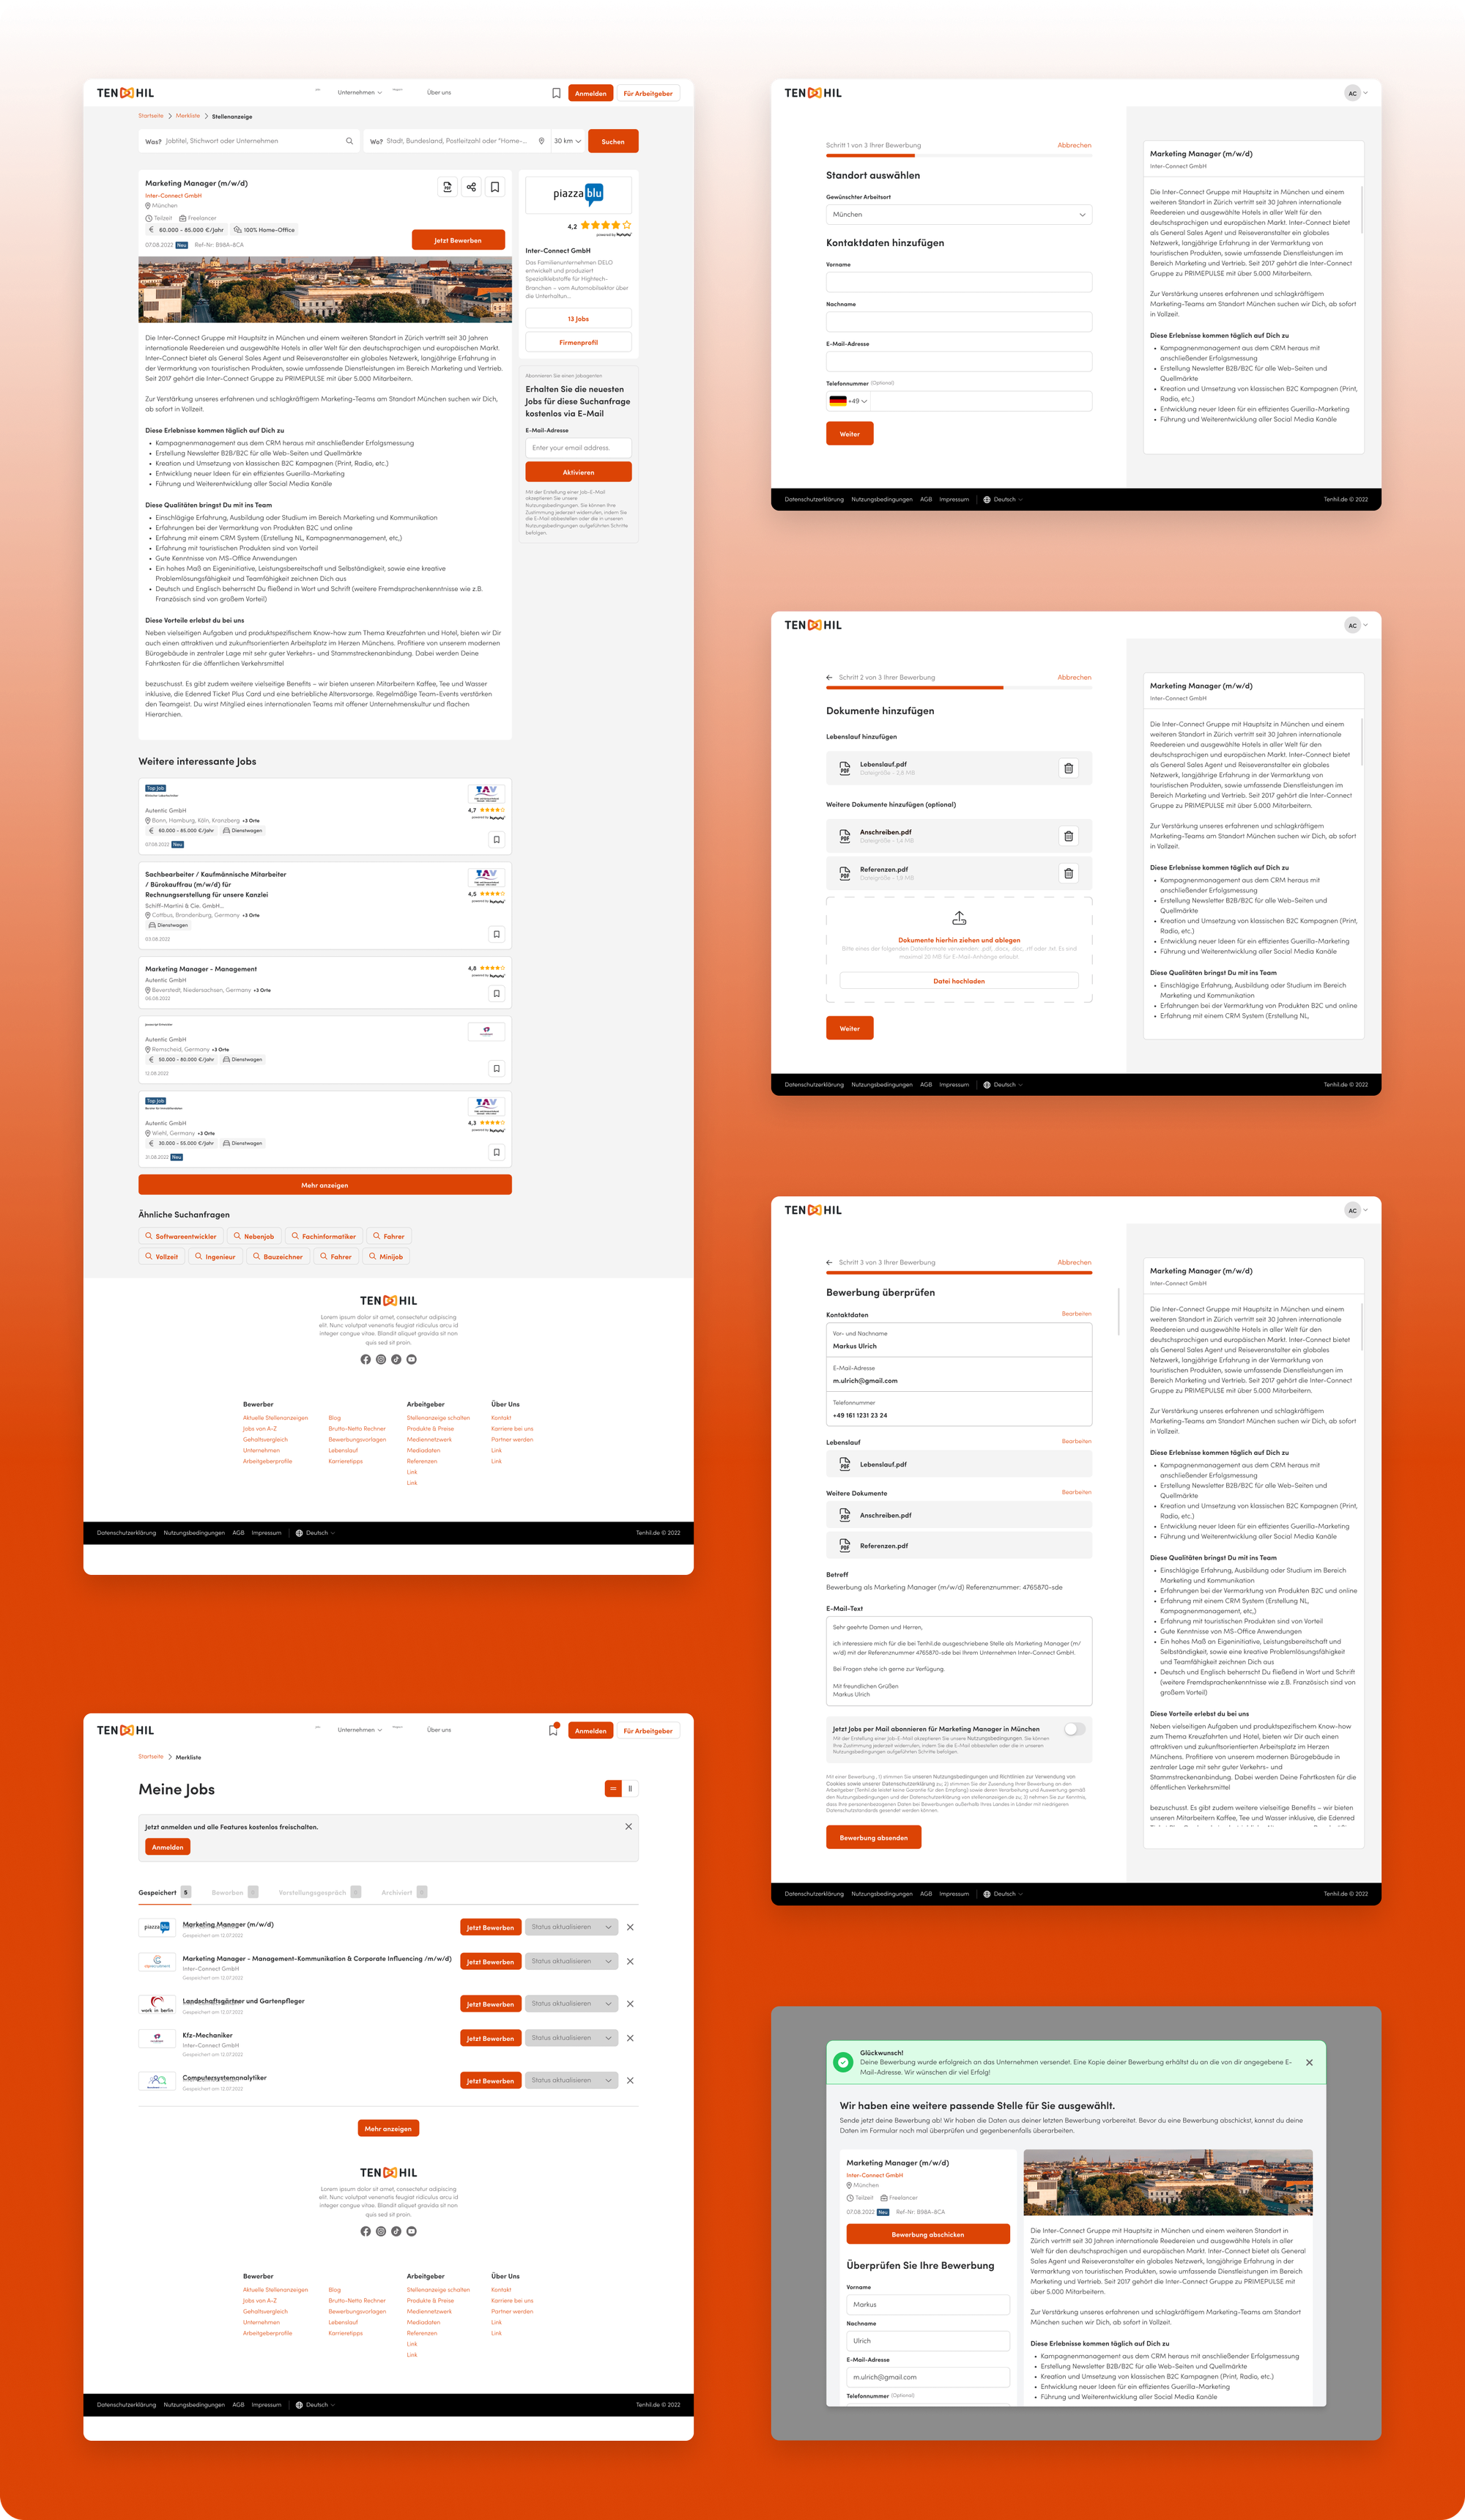 The result - screens of the web job portal and its functions